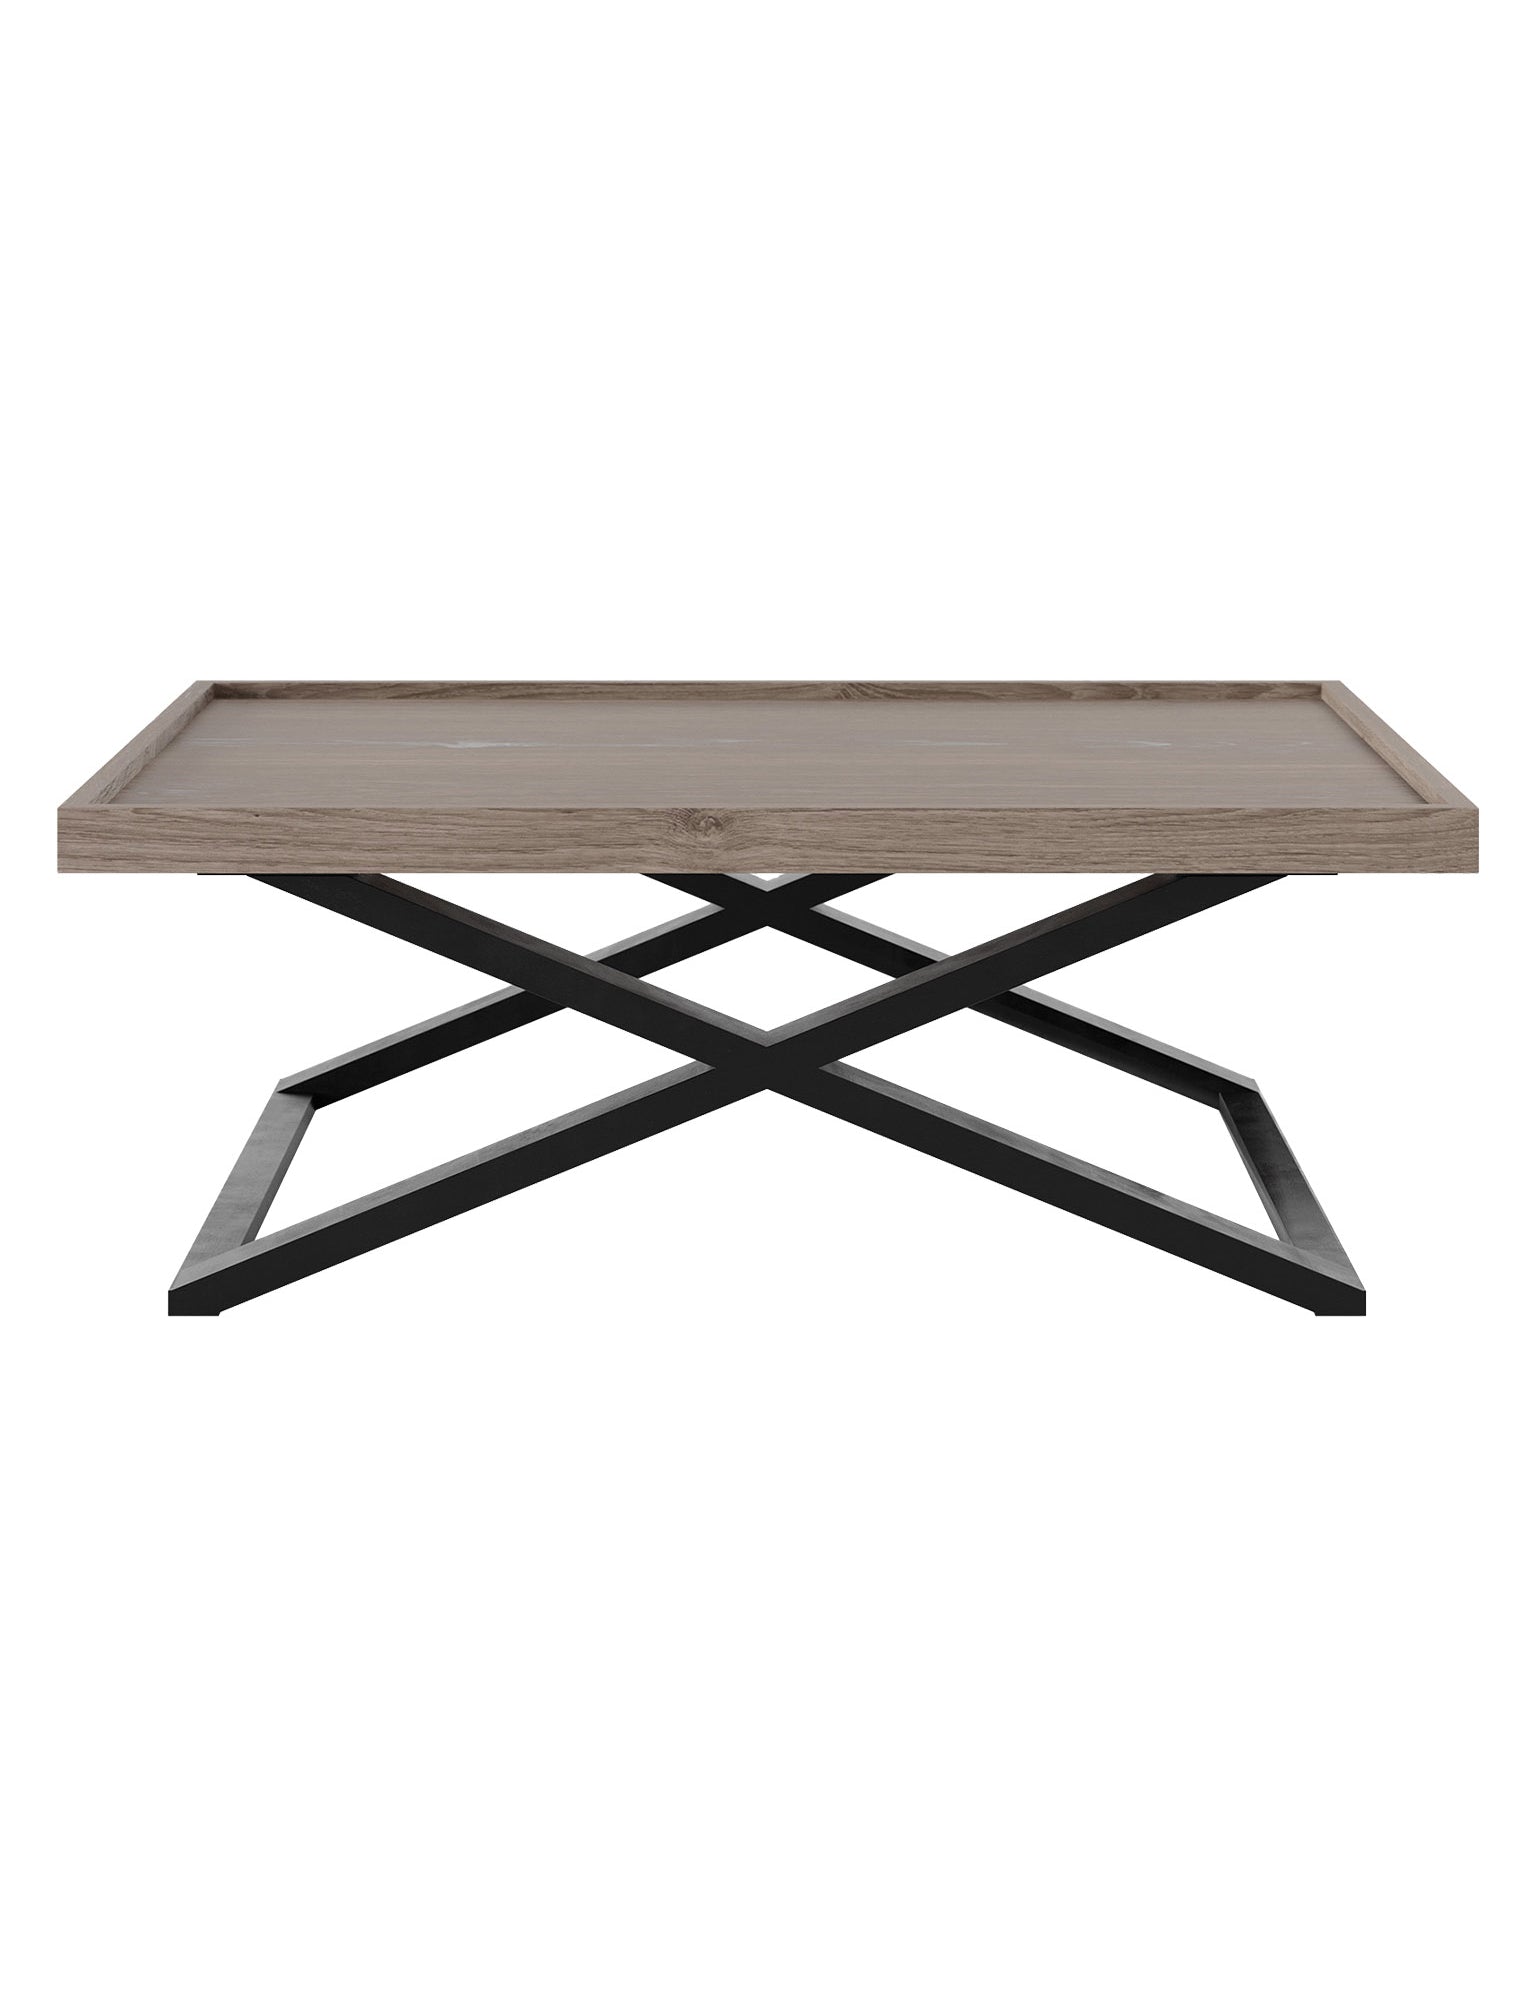 Rectangular wooden coffee table with black metal legs